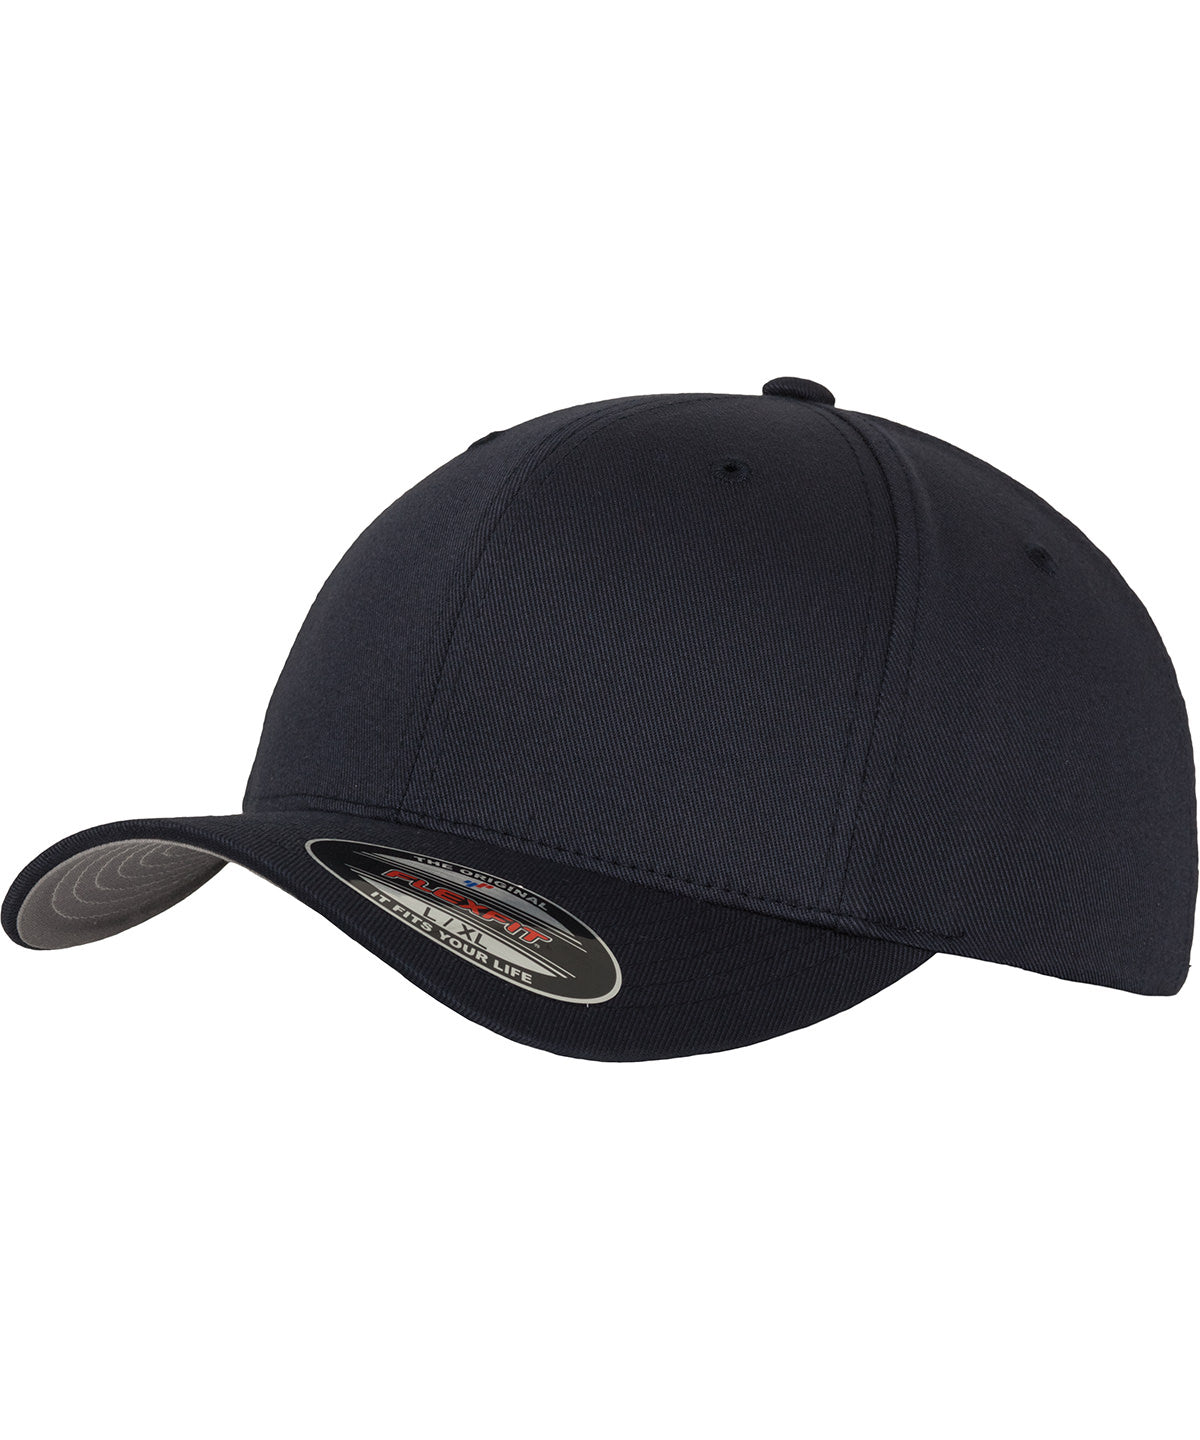 Dark Navy - Flexfit fitted baseball cap (6277) Caps Flexfit by Yupoong 2022 Spring Edit, Headwear, Must Haves, New Colours for 2023, Rebrandable, Summer Accessories Schoolwear Centres